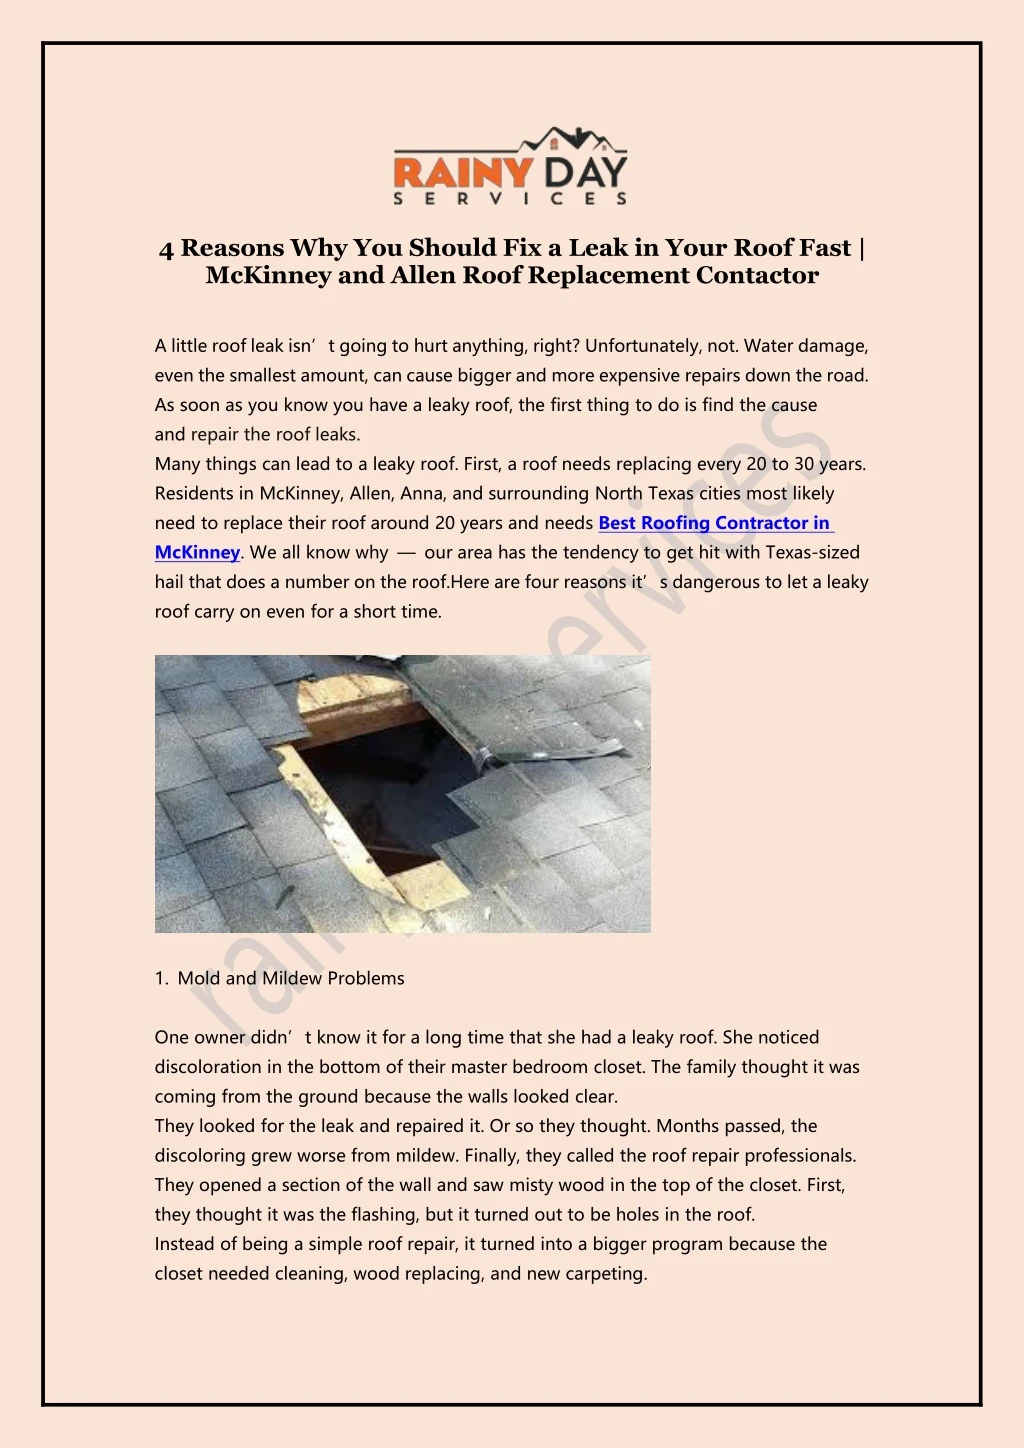 4 reasons why you should fix a leak in your roof